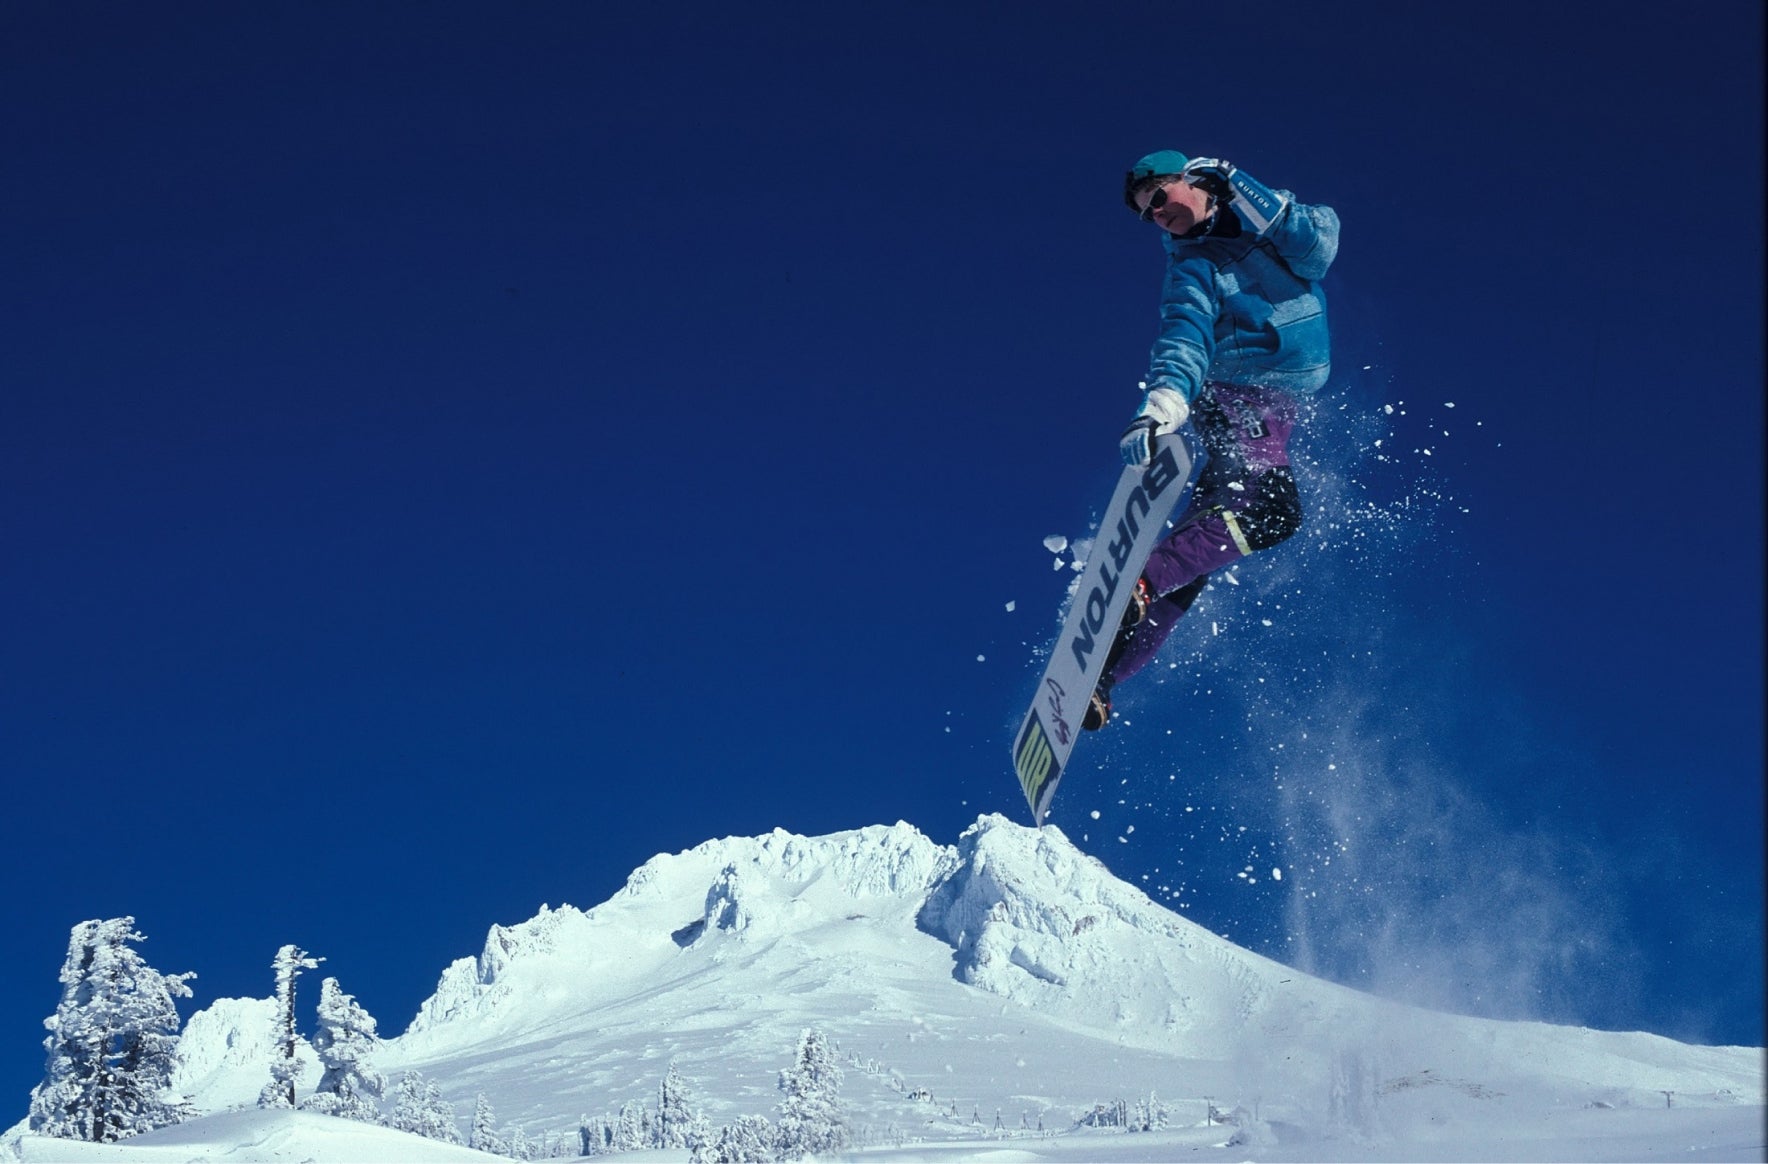 Stay Safe, Ride Smart: Essential Snowboarding Safety Tips